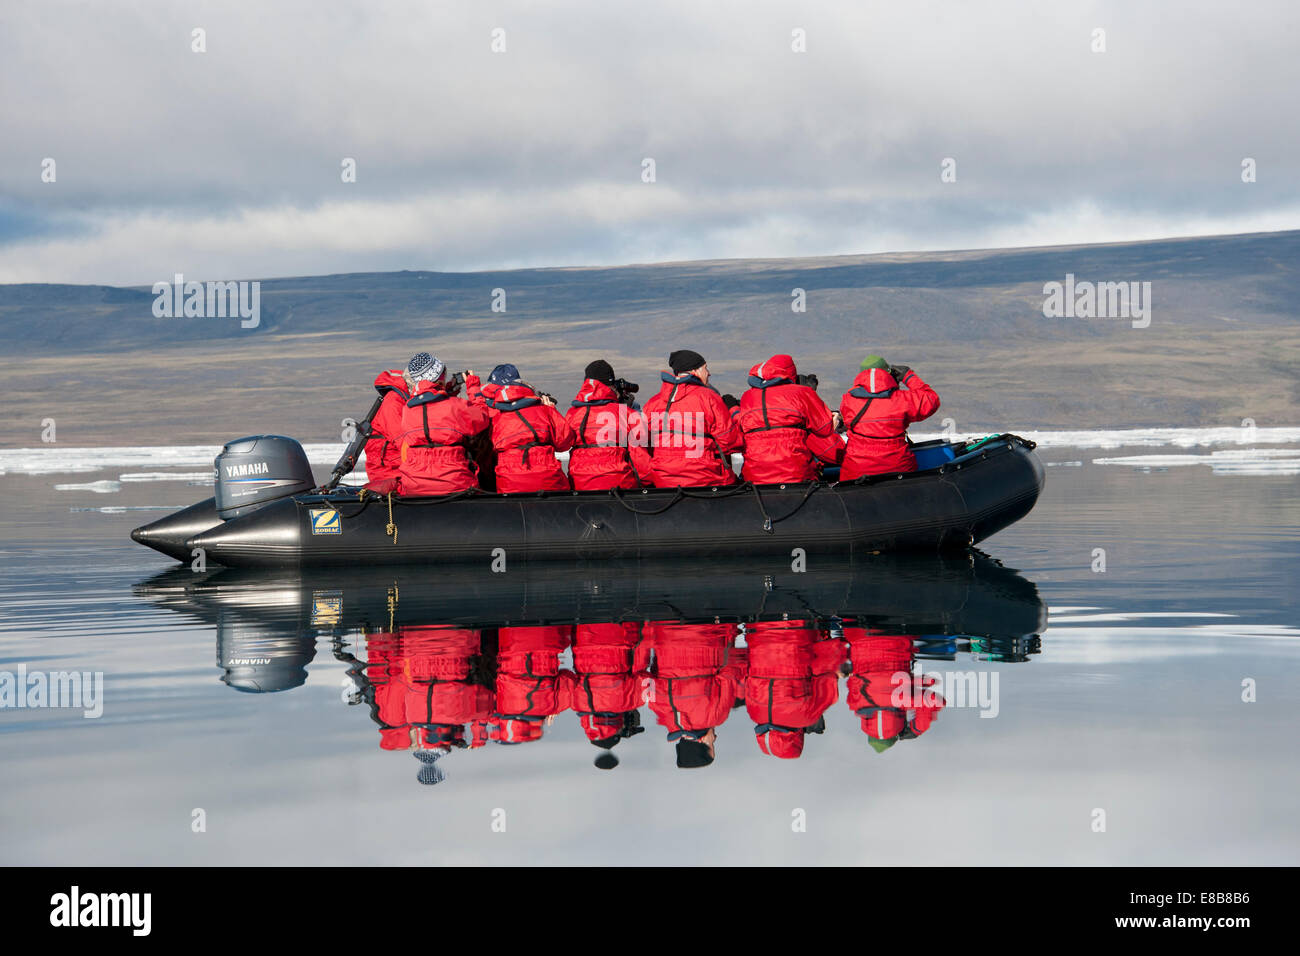 Zodia full of eco-tourists, with reflection, Baffin Island, Canada, Arctic Ocean. Stock Photo